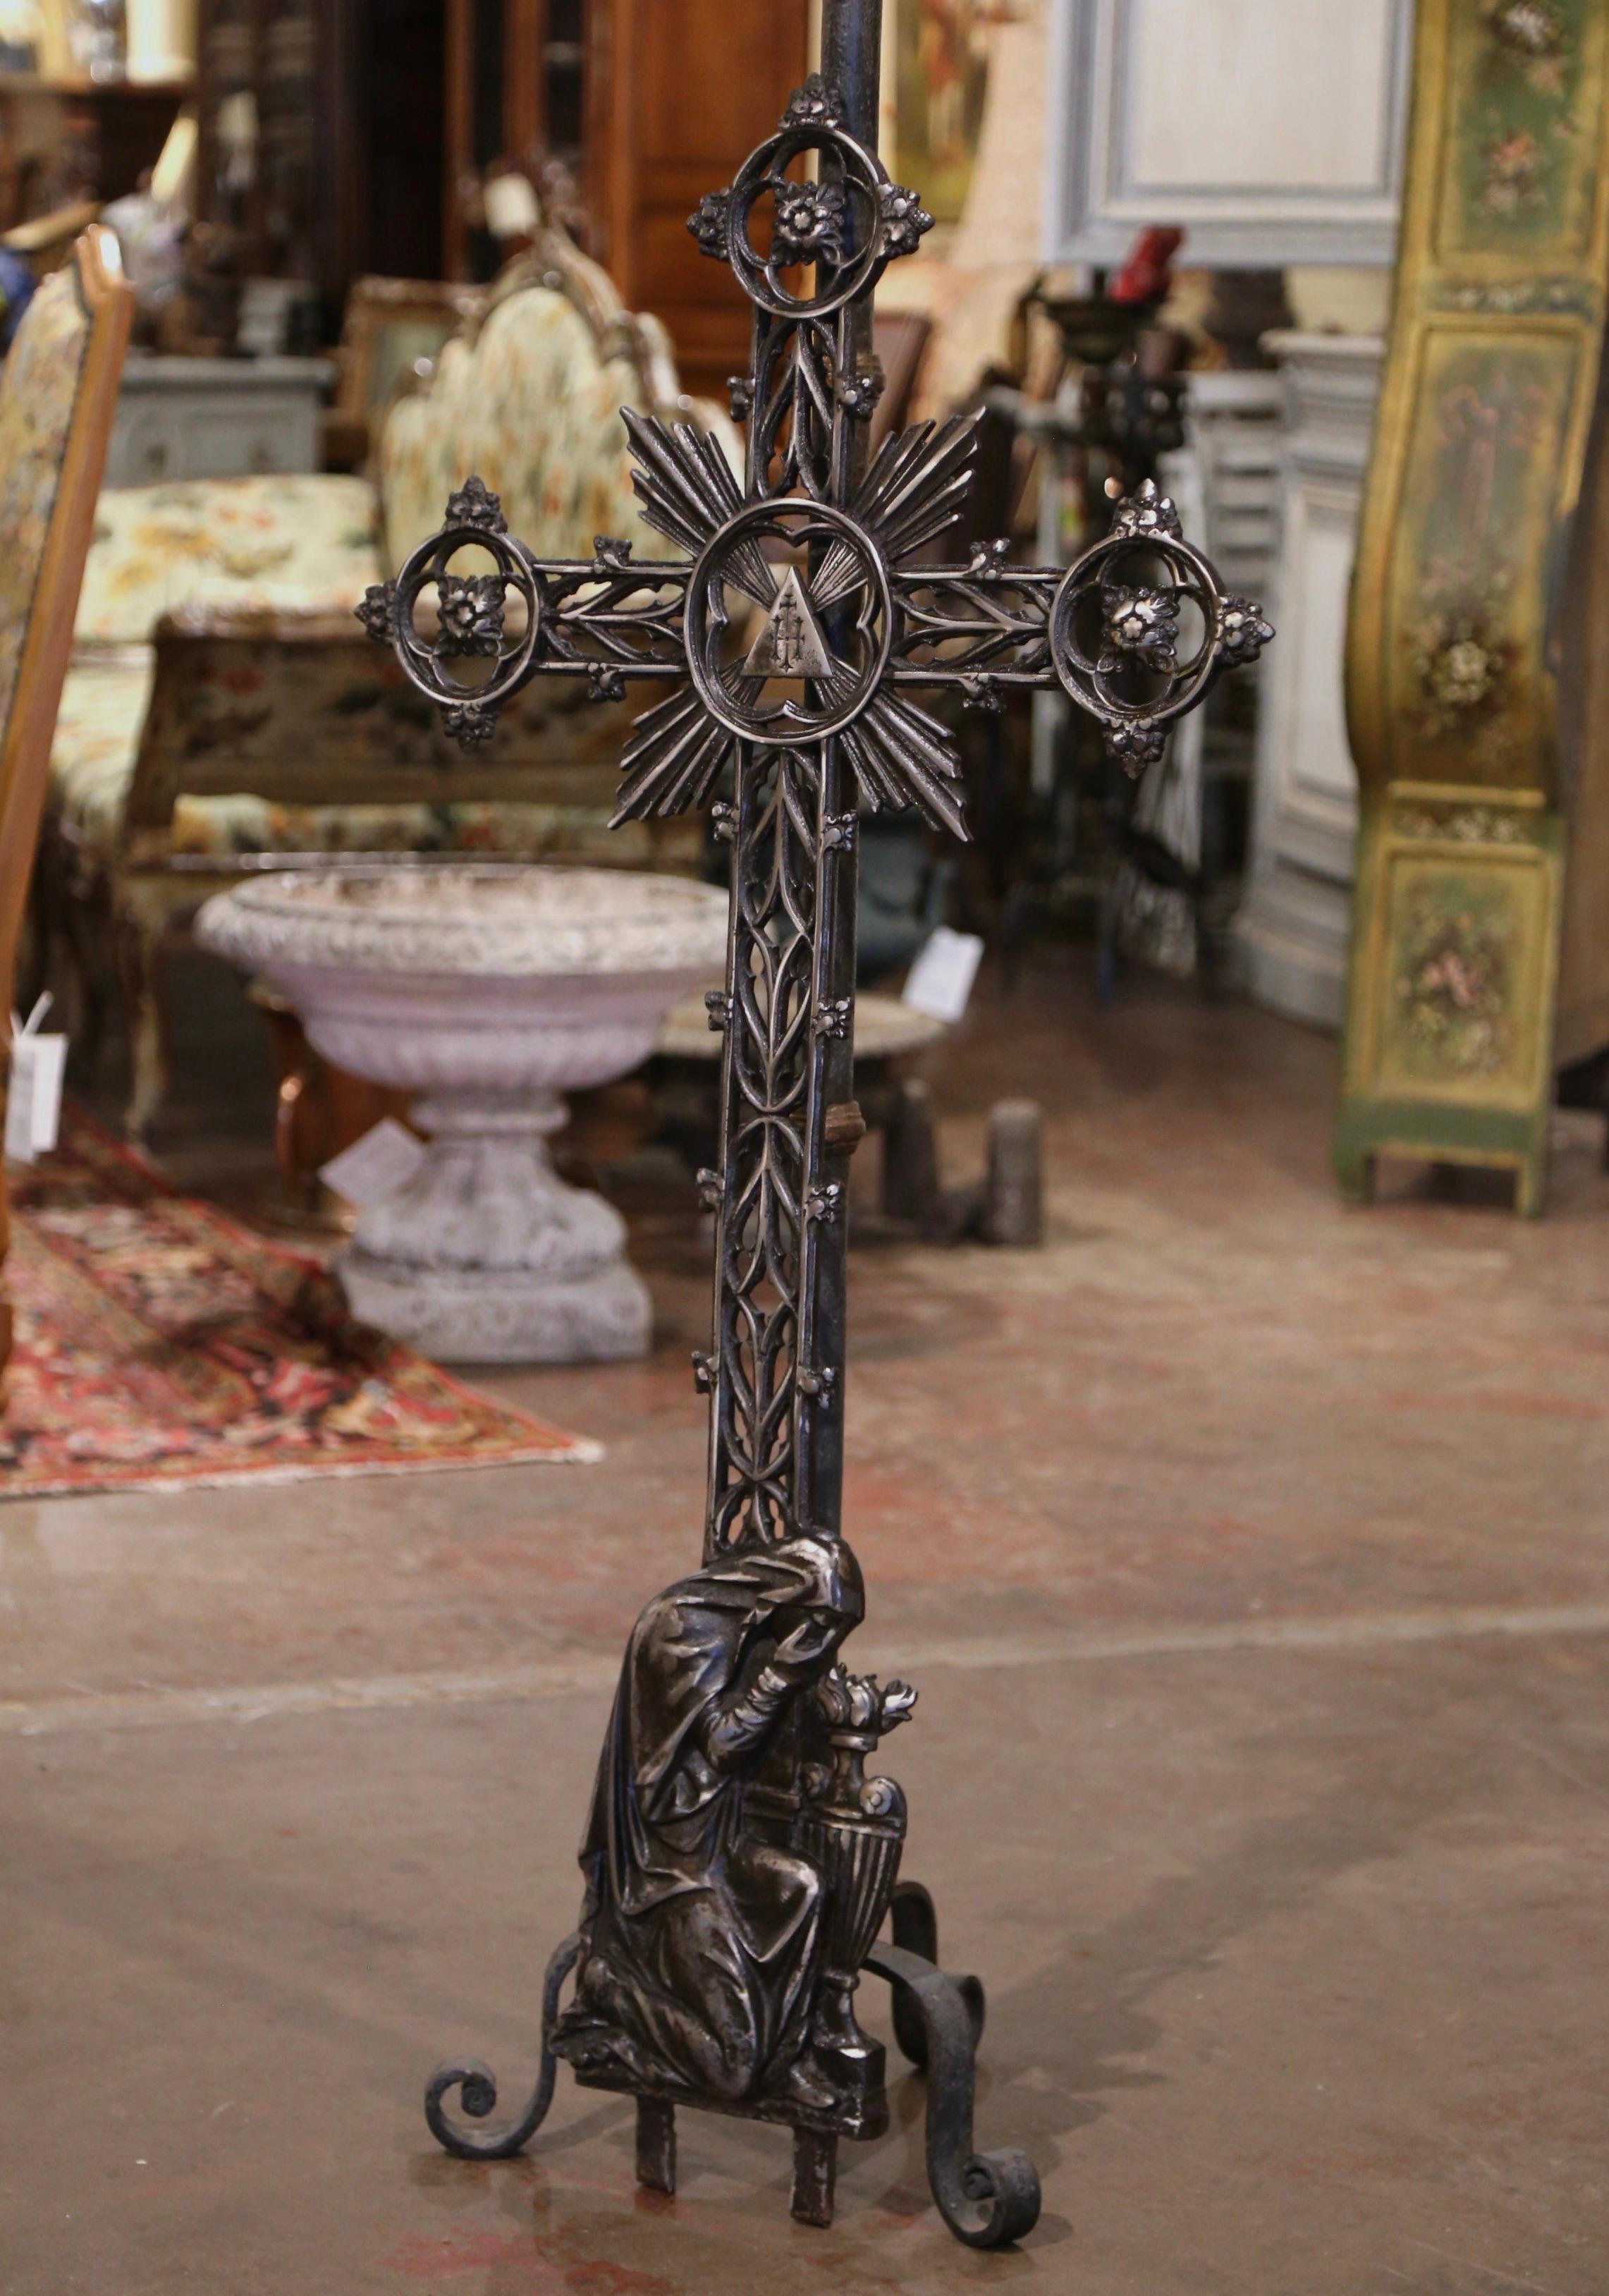 This beautiful antique cross was crafted in France, circa 1870. The large iron religious item decorated with scroll and floral motifs is embellished with the Holy Trinity at the center, surrounded by beautifully crafted sun rays; It represents the